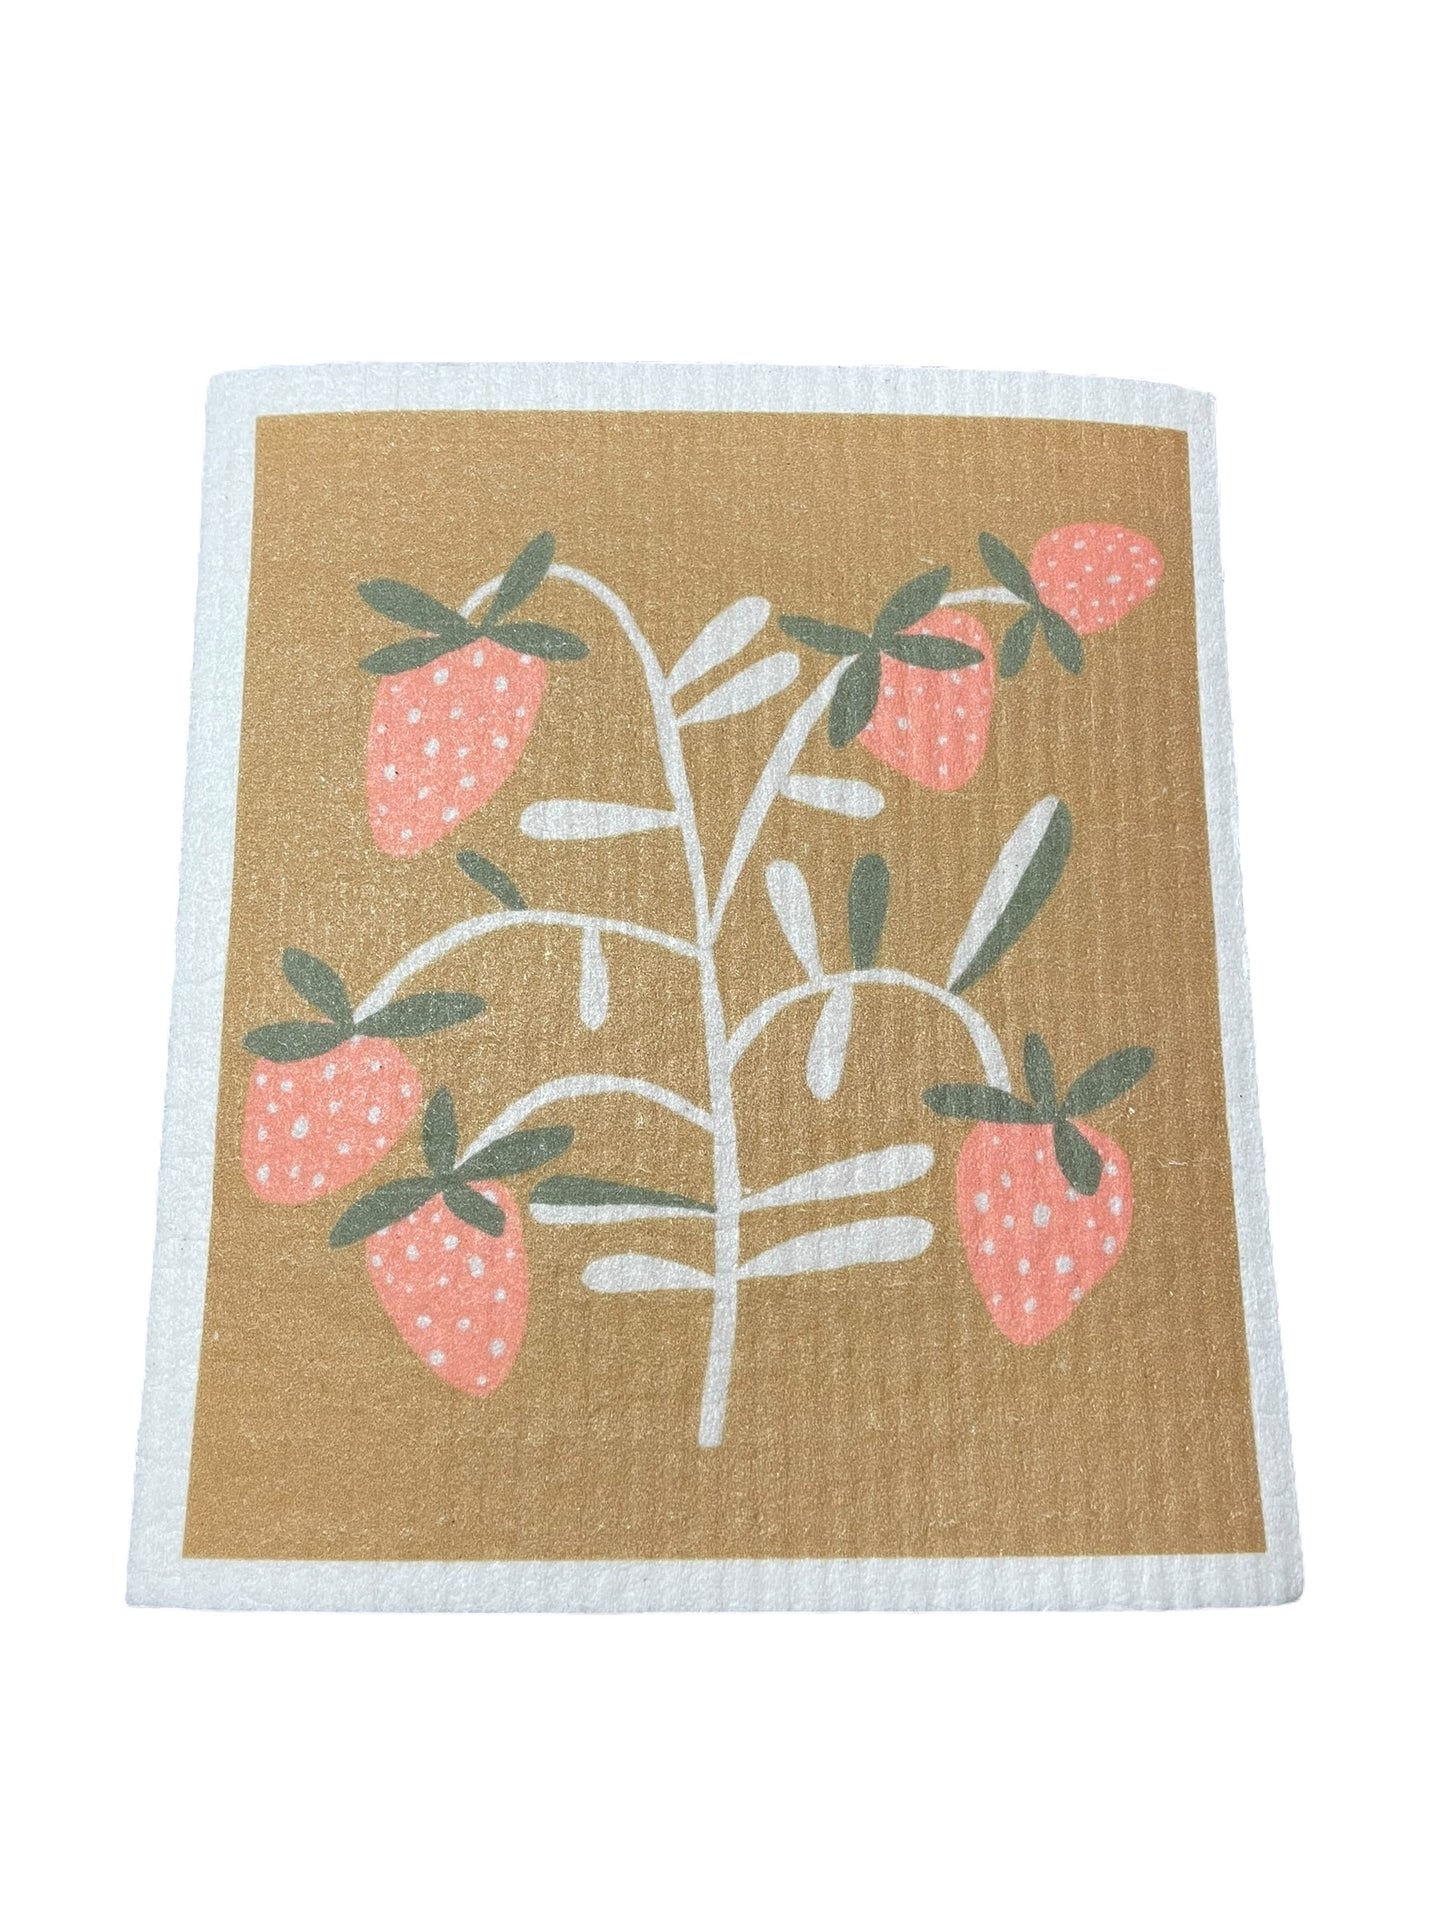 Reusable Cellulose Sponge Cloth w/ Fruit or Quote